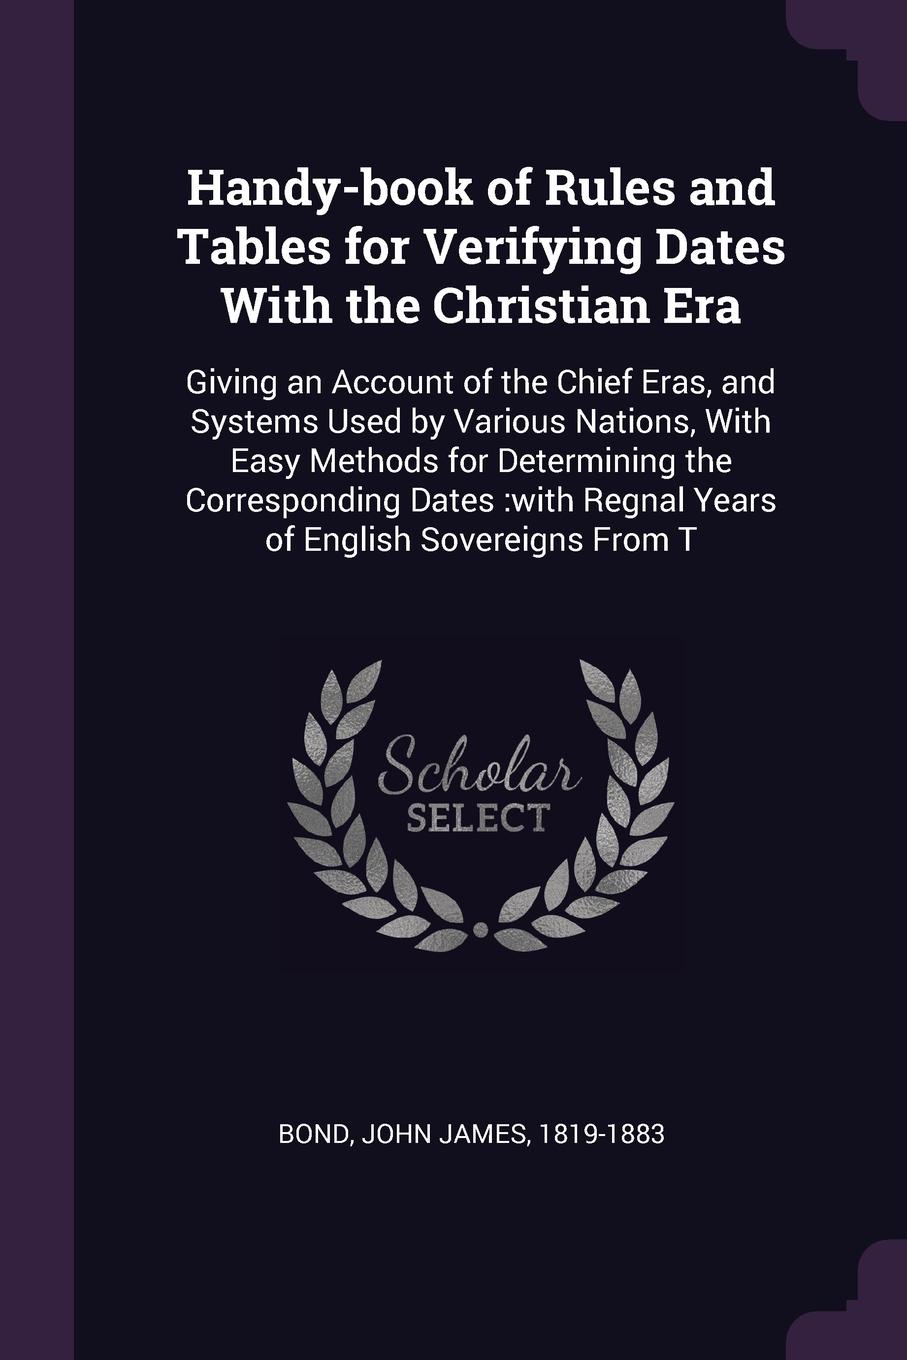 Handy-book of Rules and Tables for Verifying Dates With the Christian Era. Giving an Account of the Chief Eras, and Systems Used by Various Nations, With Easy Methods for Determining the Corresponding Dates :with Regnal Years of English Sovereigns...